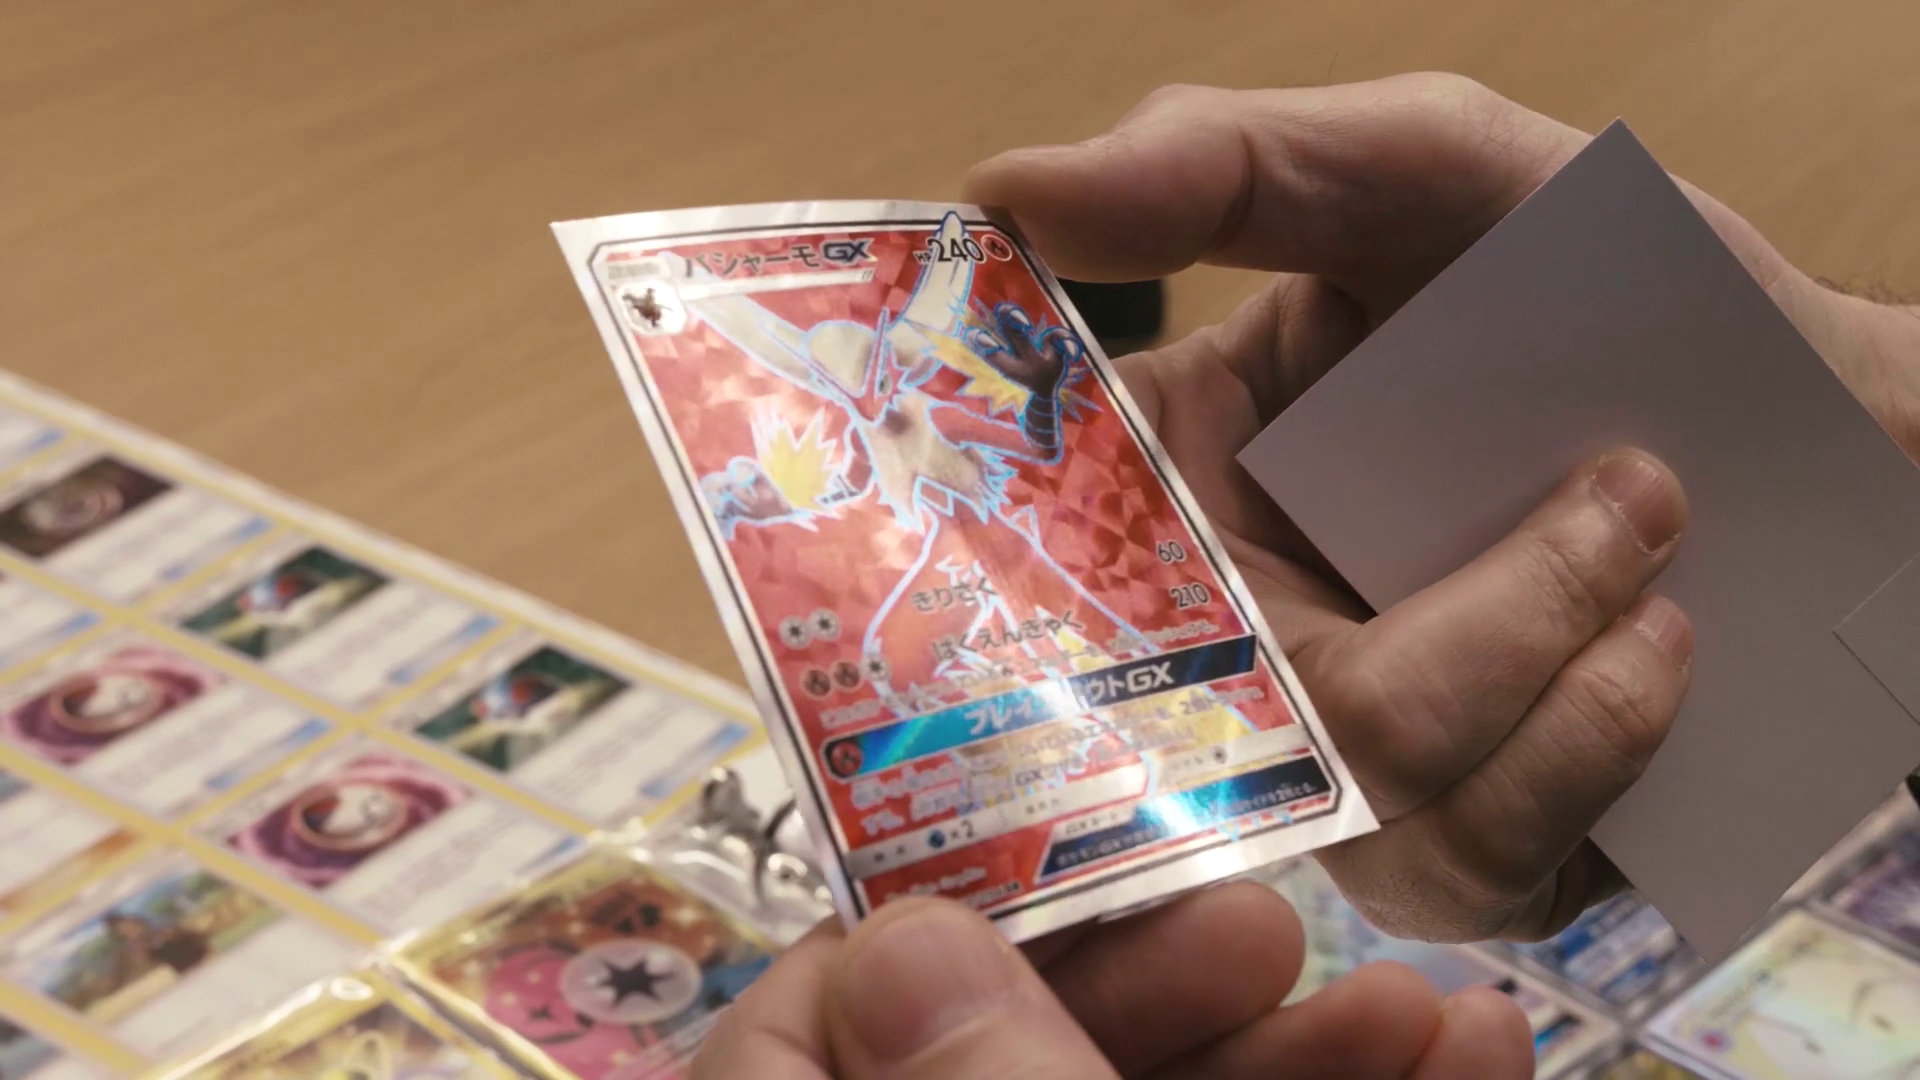 Unprecedented Video Showing How Pokemon Cards are Made from Start to Finish! - | PokéBeach.com Forums